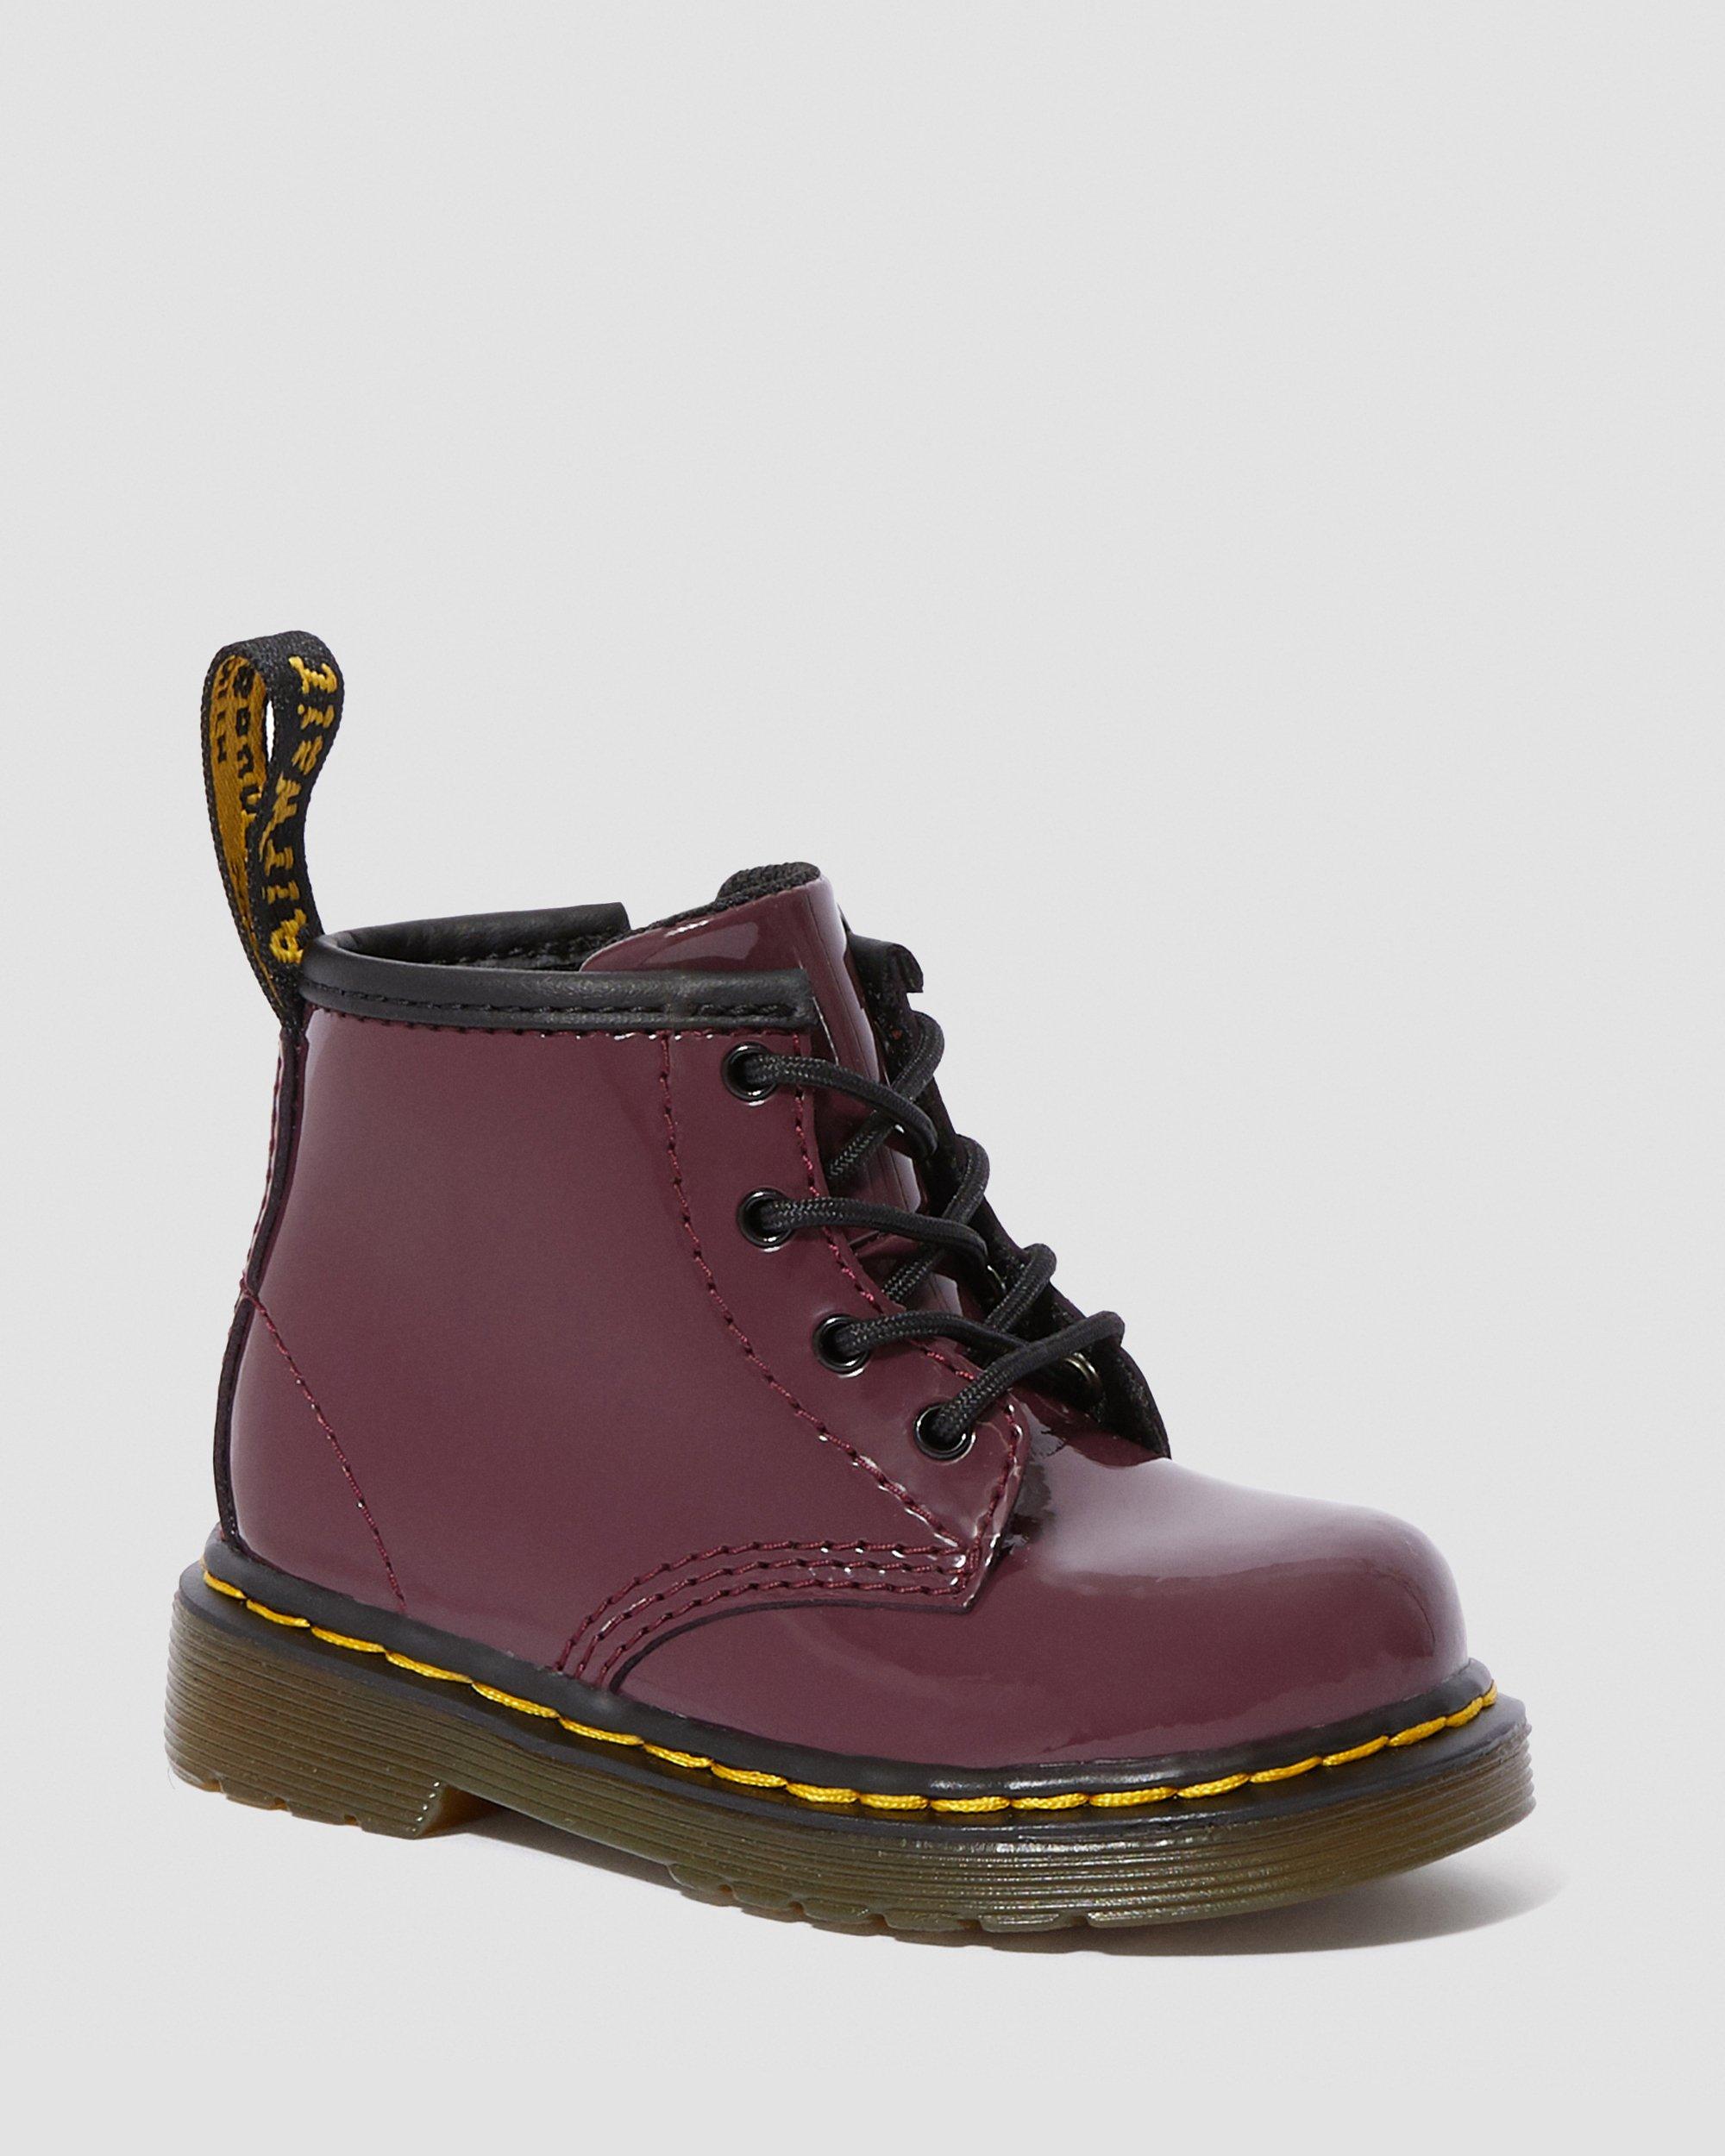 Infant 1460 Patent Leather Lace Up Boots in Dark Red